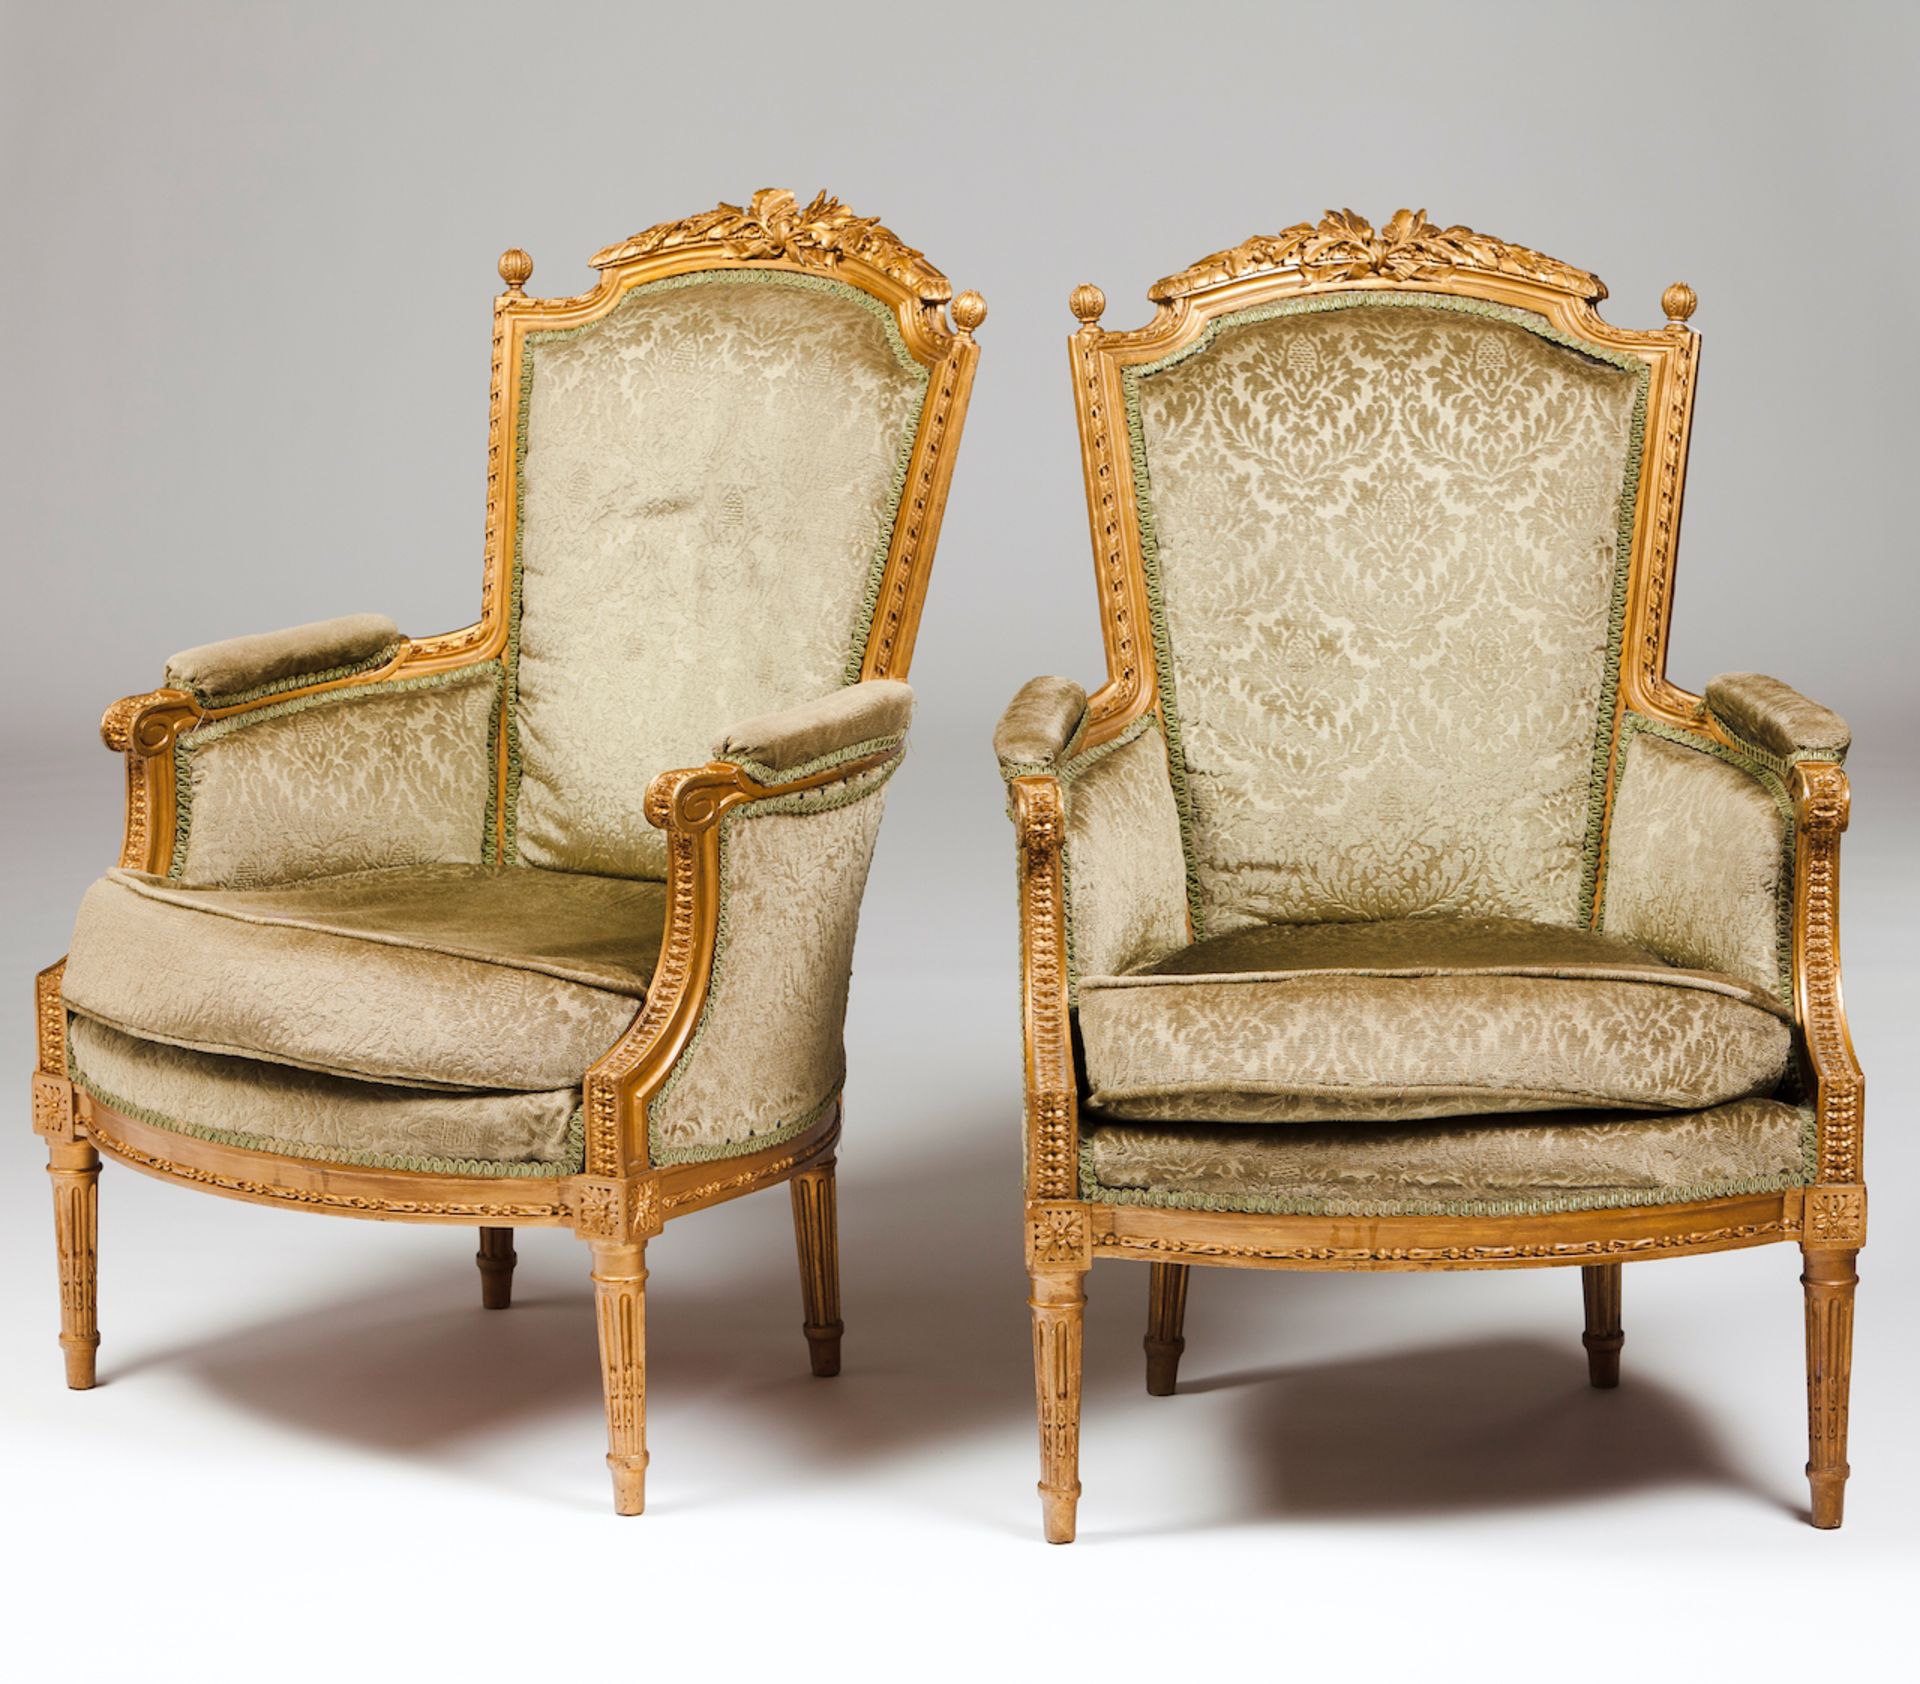 A pair of Louis XVI style bergèrescarved and gilt timberFabric lined seats, backs and armsFrance,